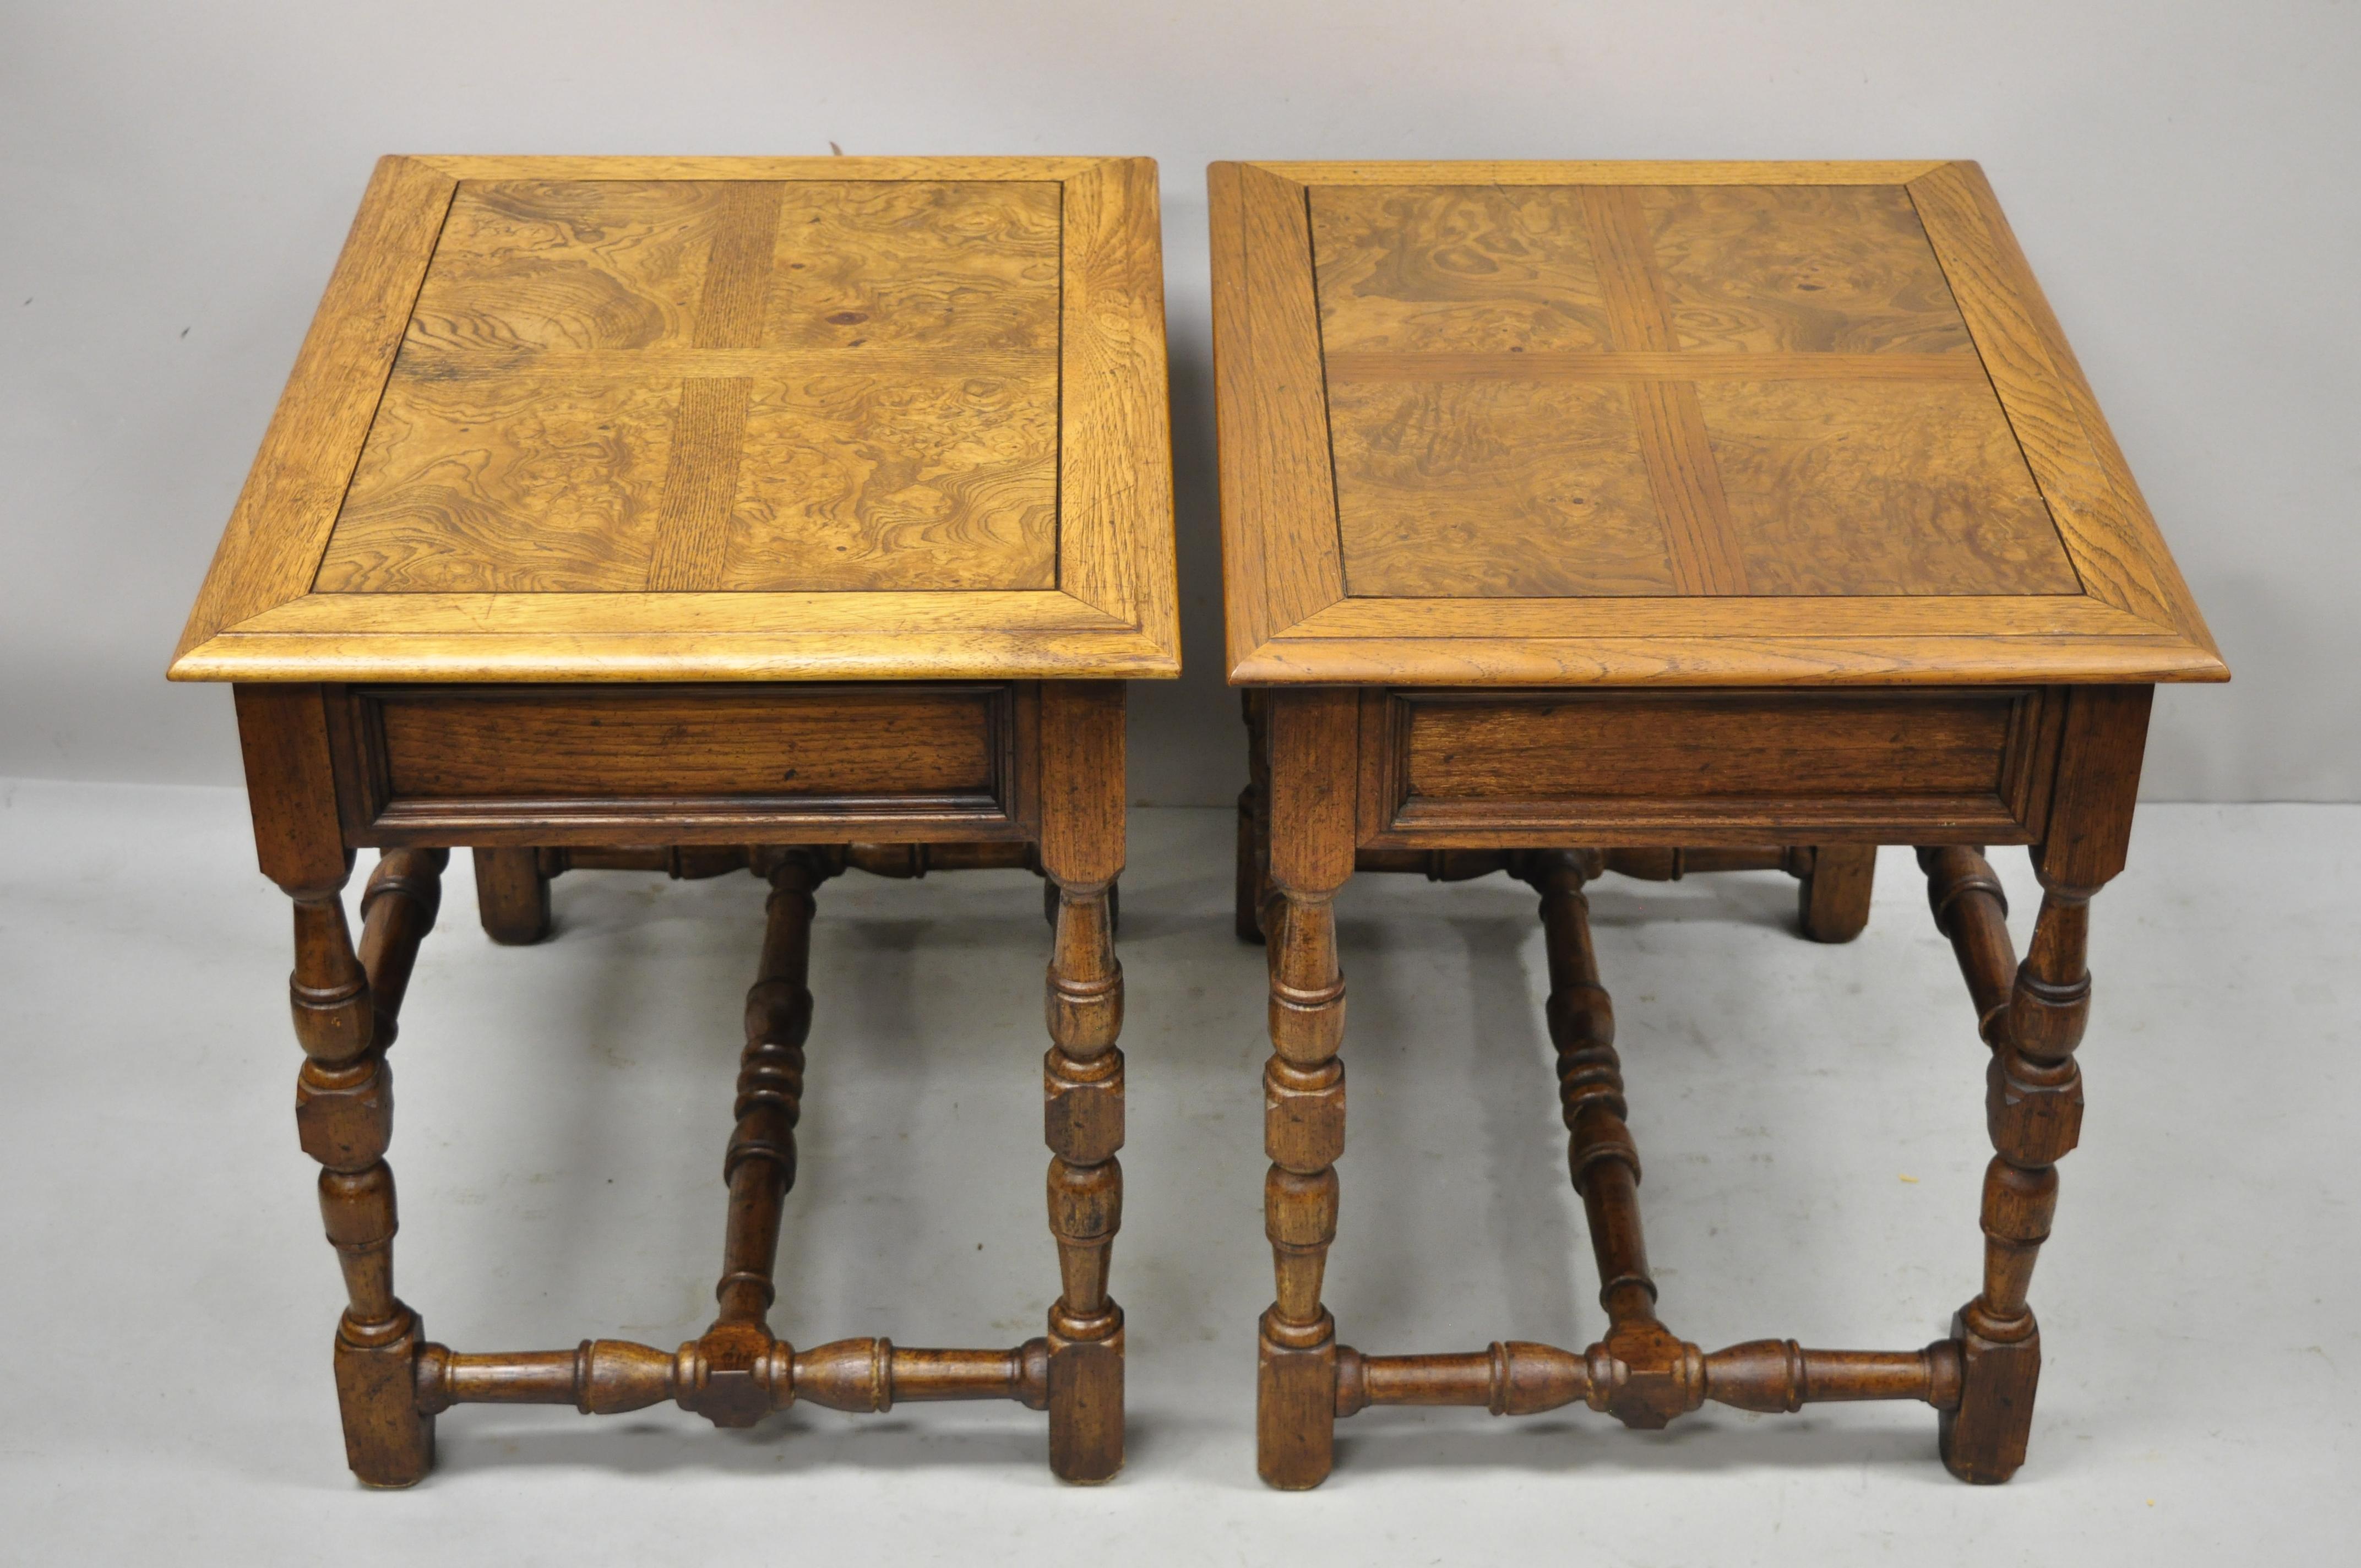 Hekman French Country English Jacobean Oak Burlwood Lamp End Tables, a Pair For Sale 3